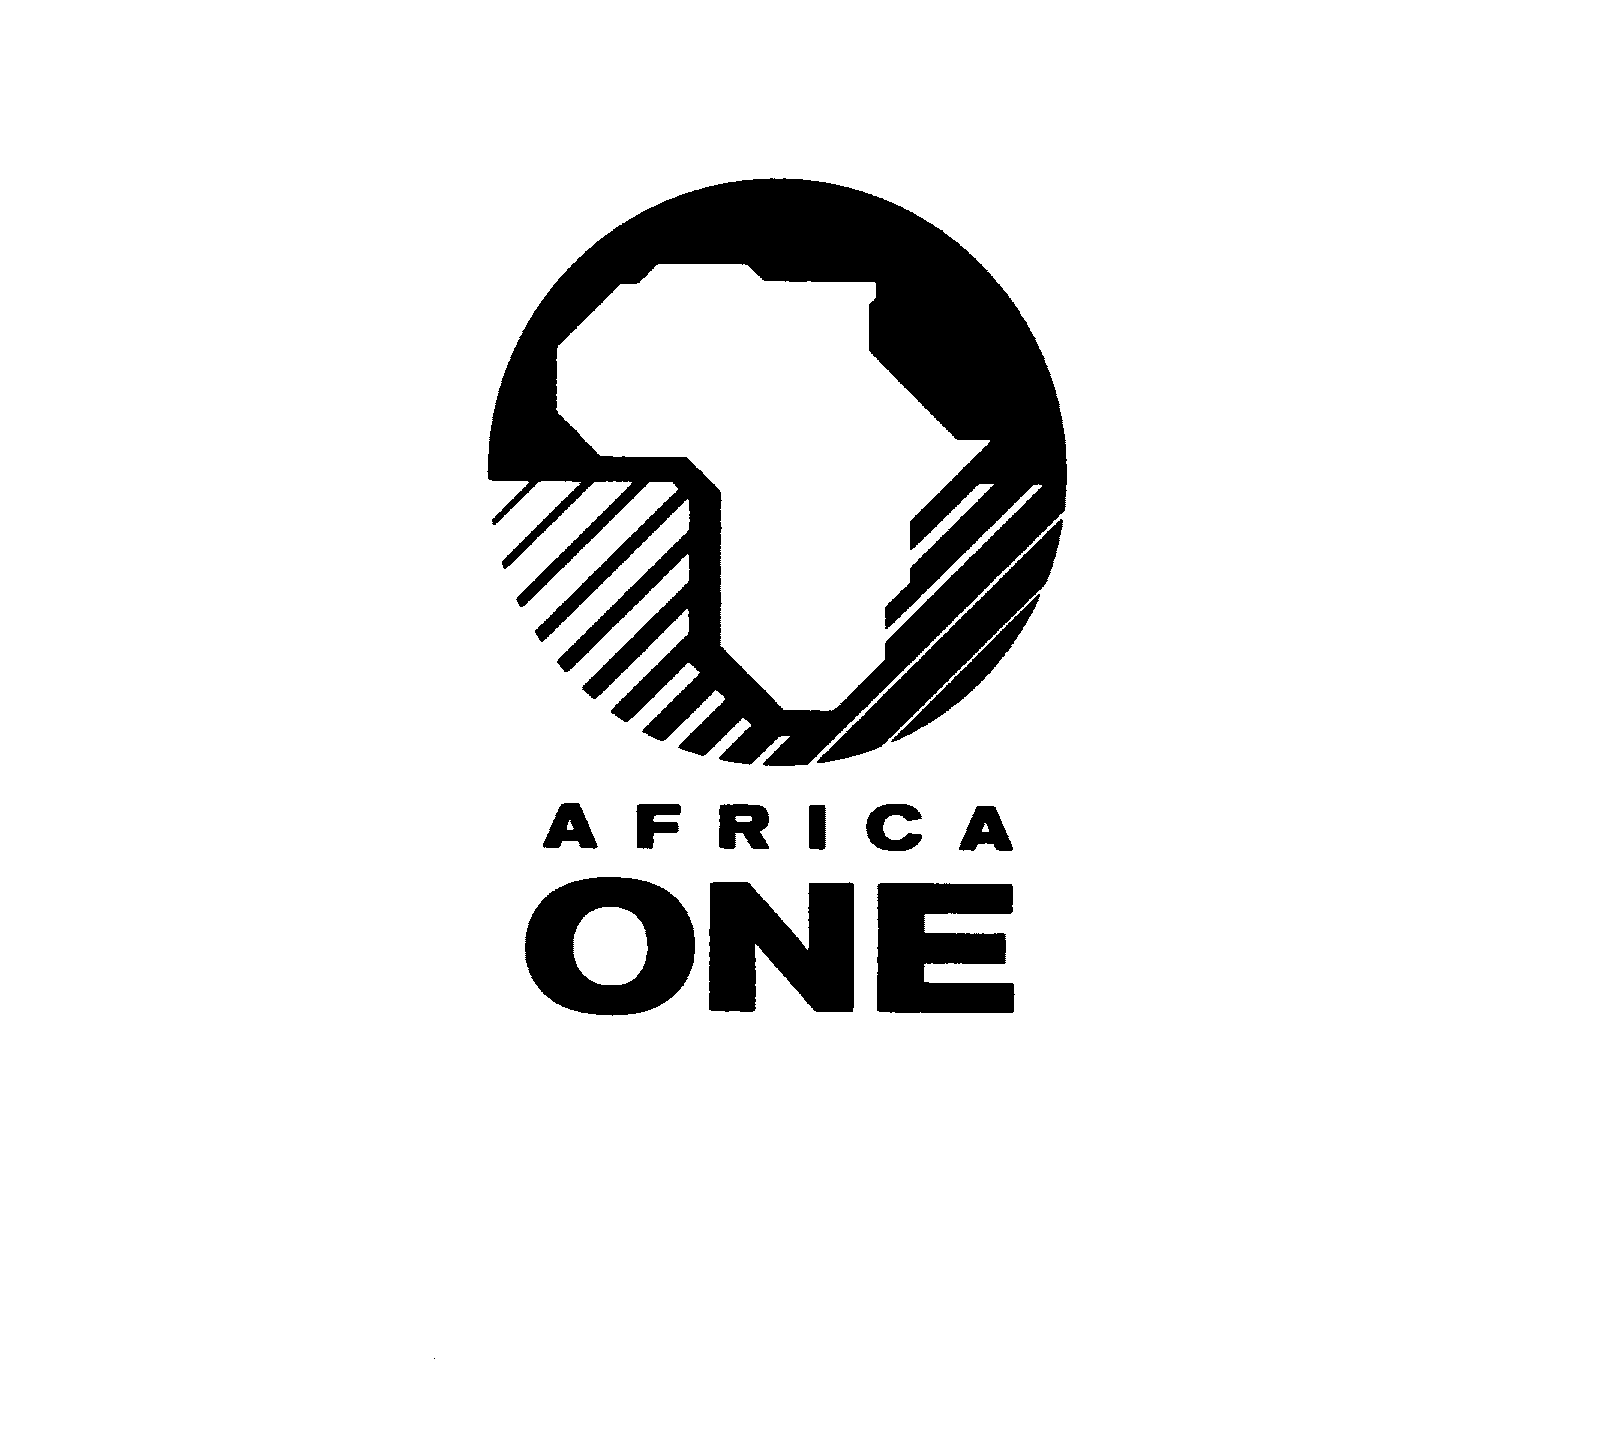 AFRICA ONE